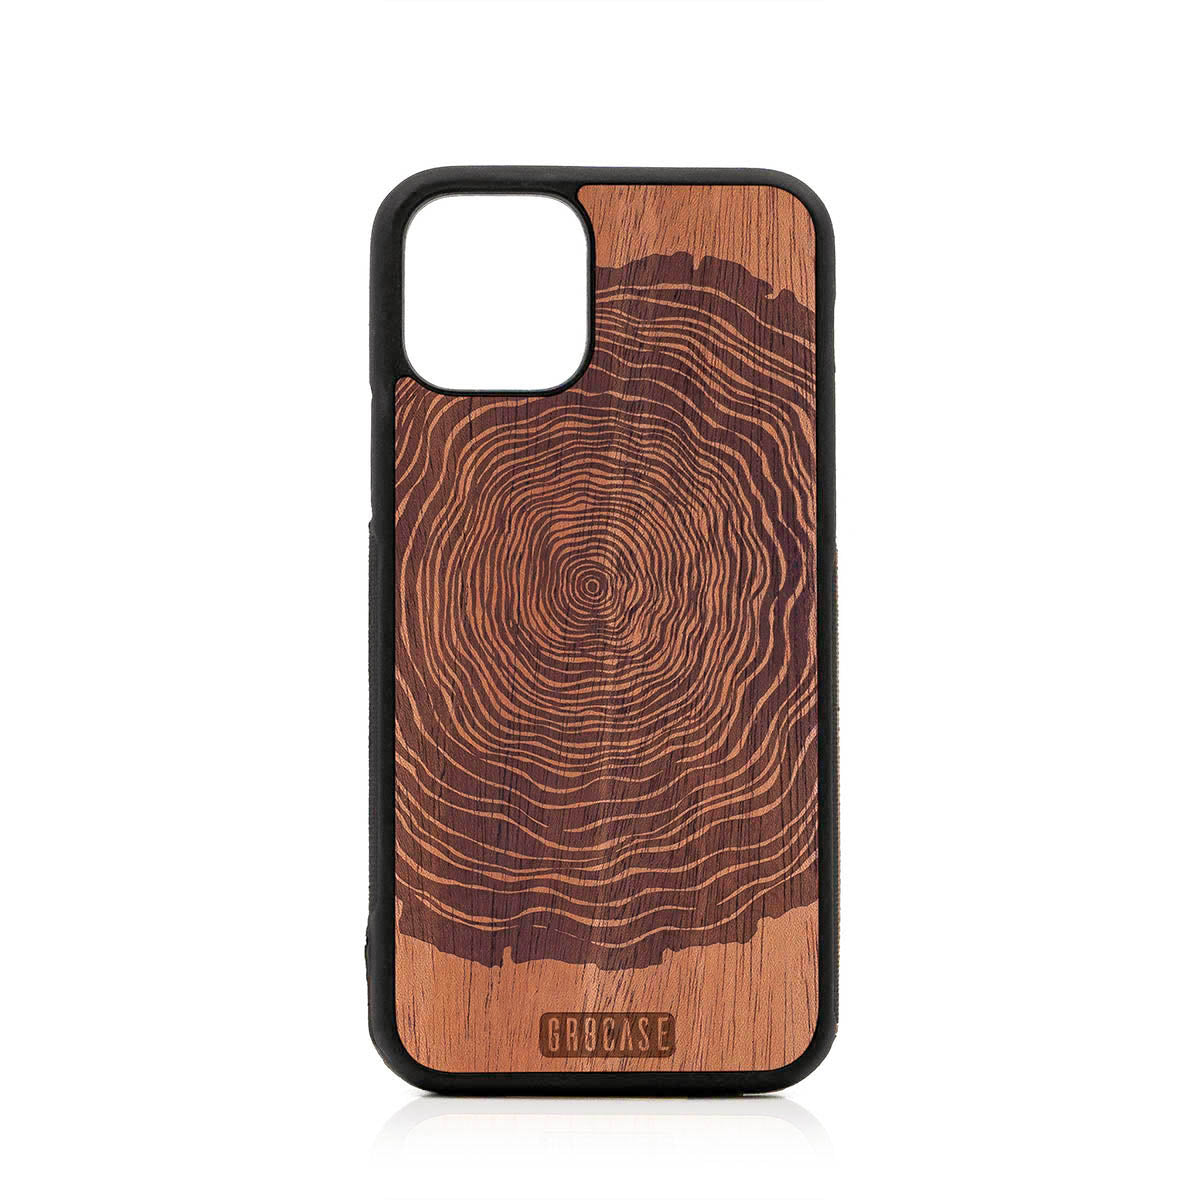 Tree Rings Design Wood Case For iPhone 11 Pro